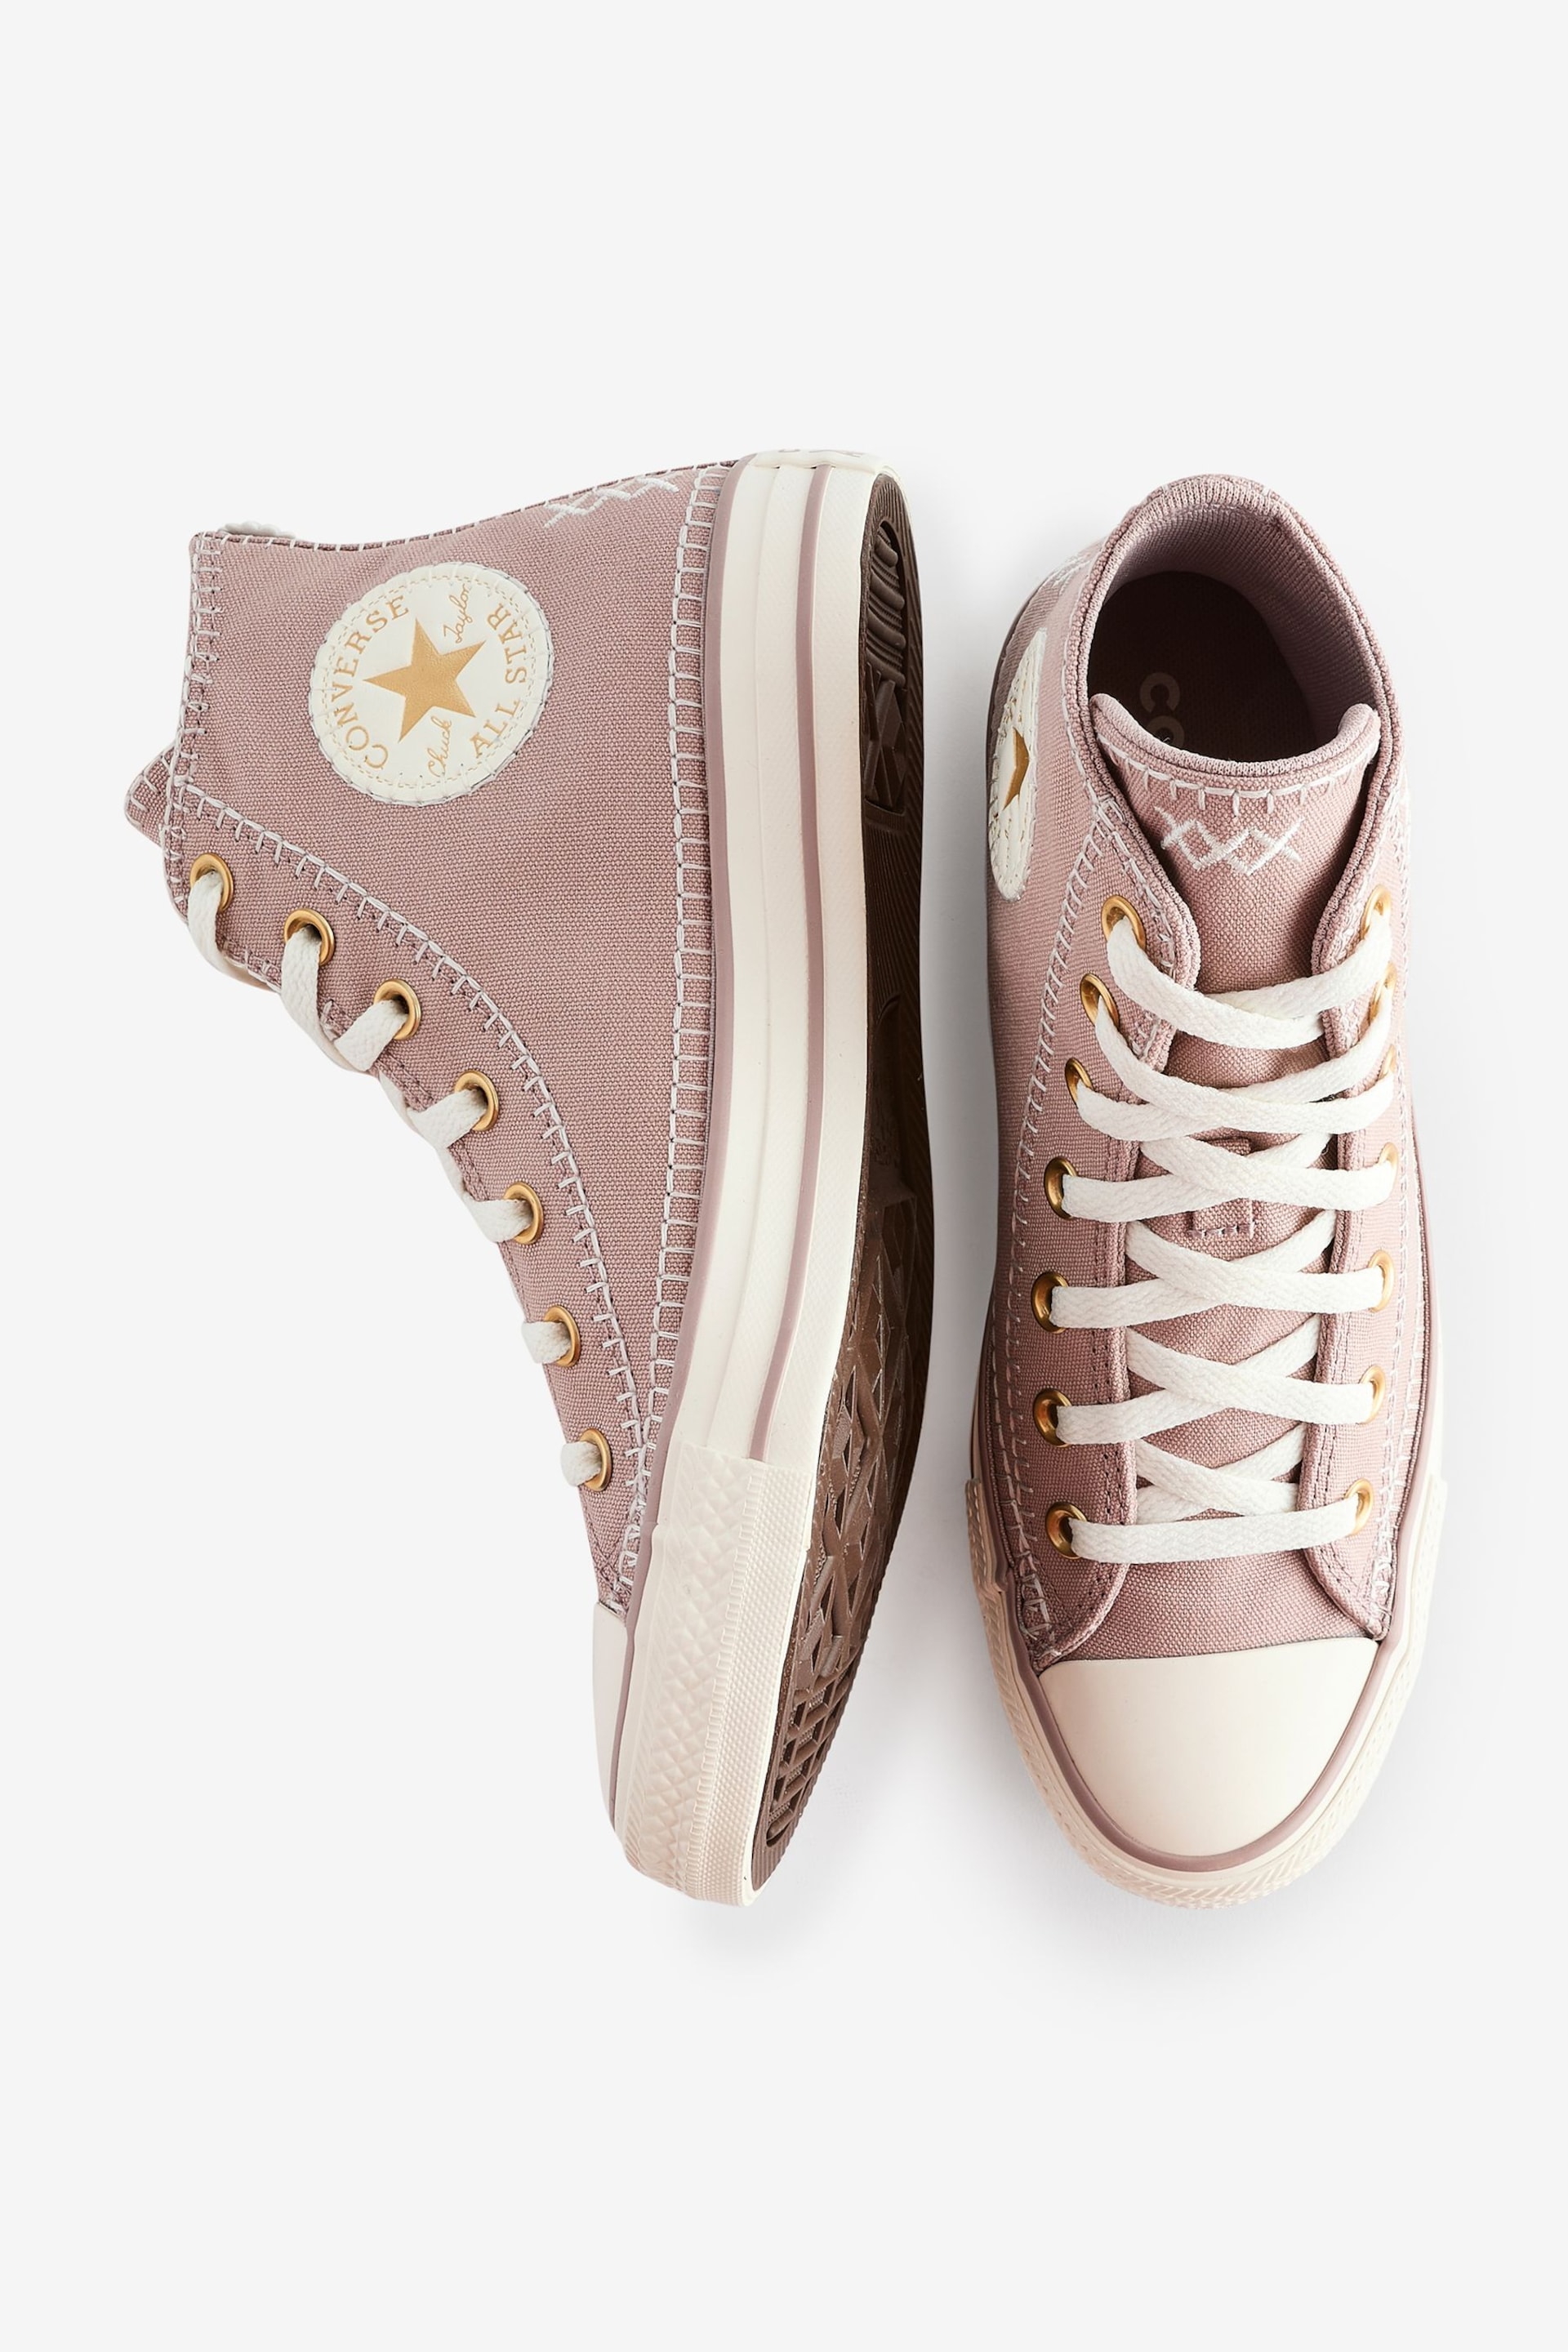 Converse Neutral Chuck Taylor All Star High Top Trainers - Image 9 of 9